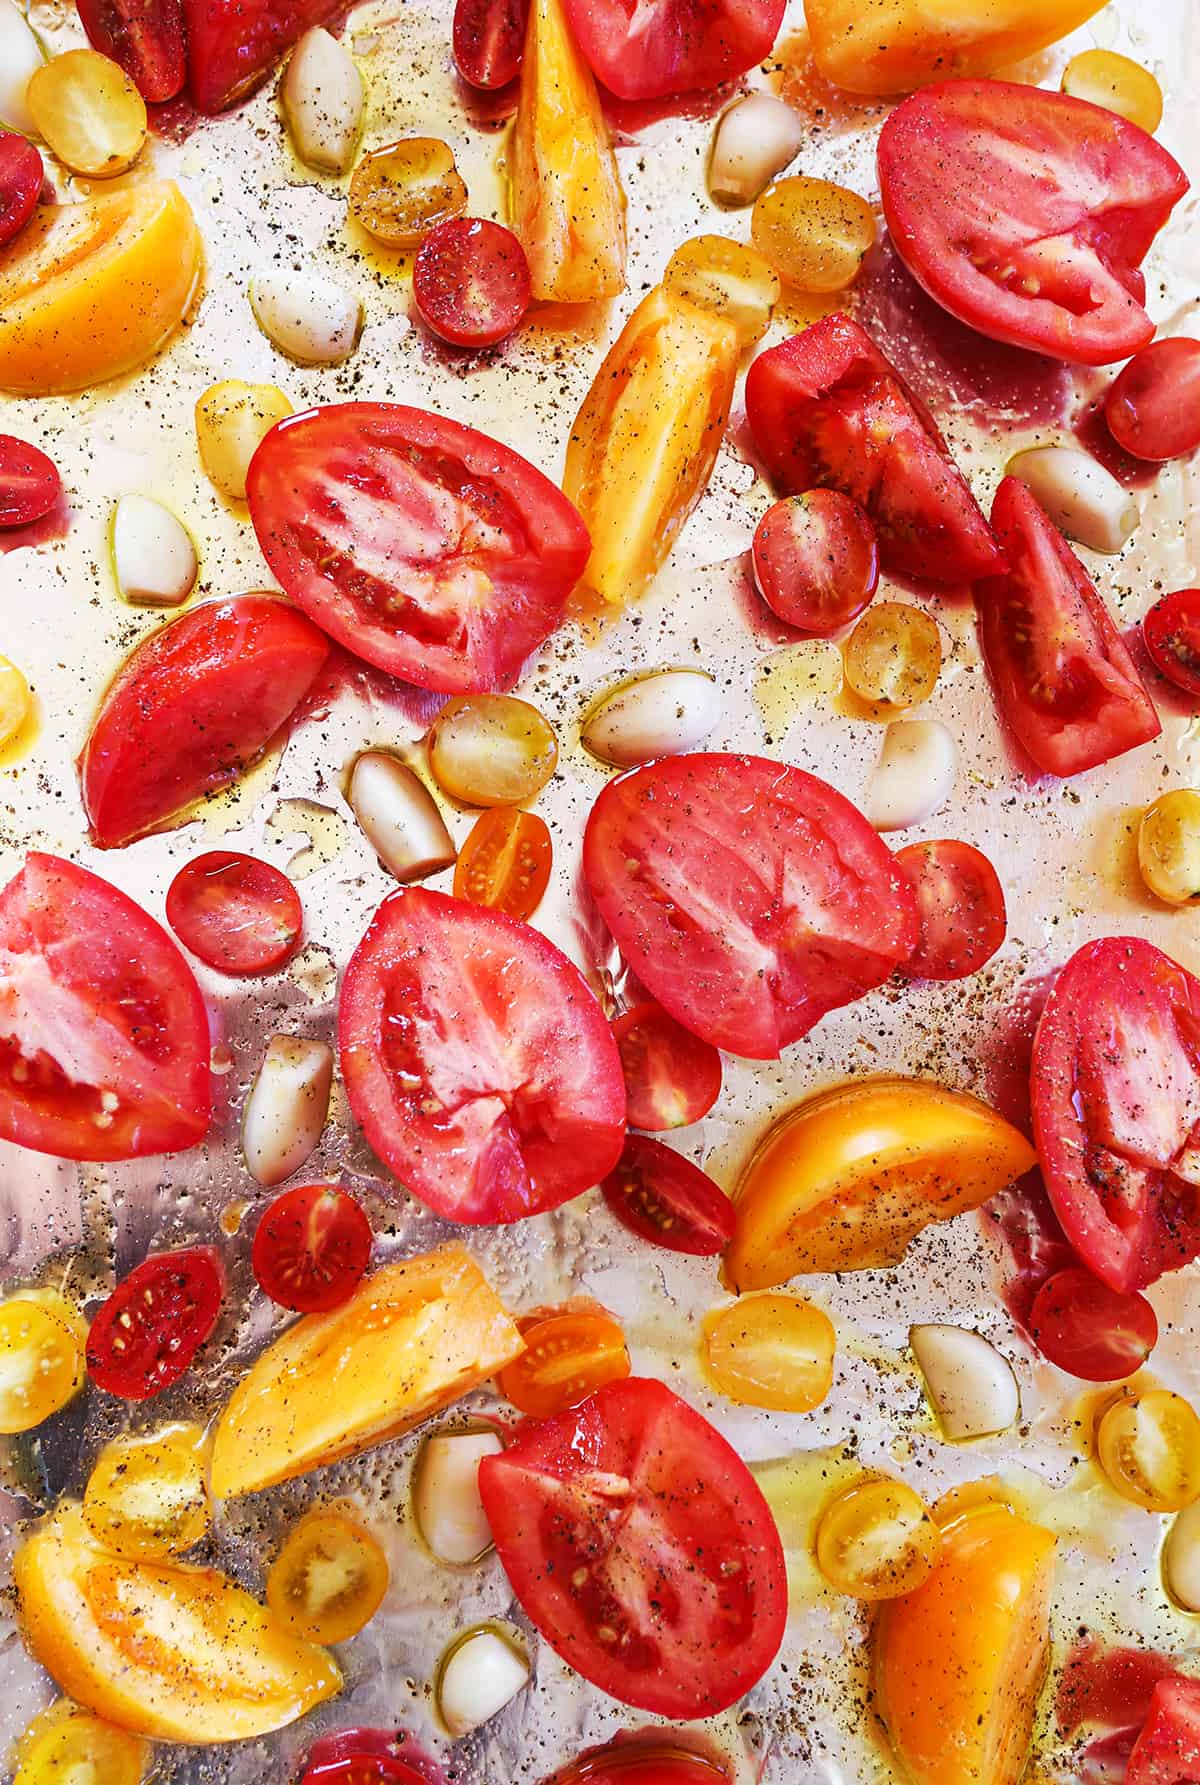 Tomato chunks and garlic pieces on a baking sheet, sprinkled with salt and pepper and ready to bake.